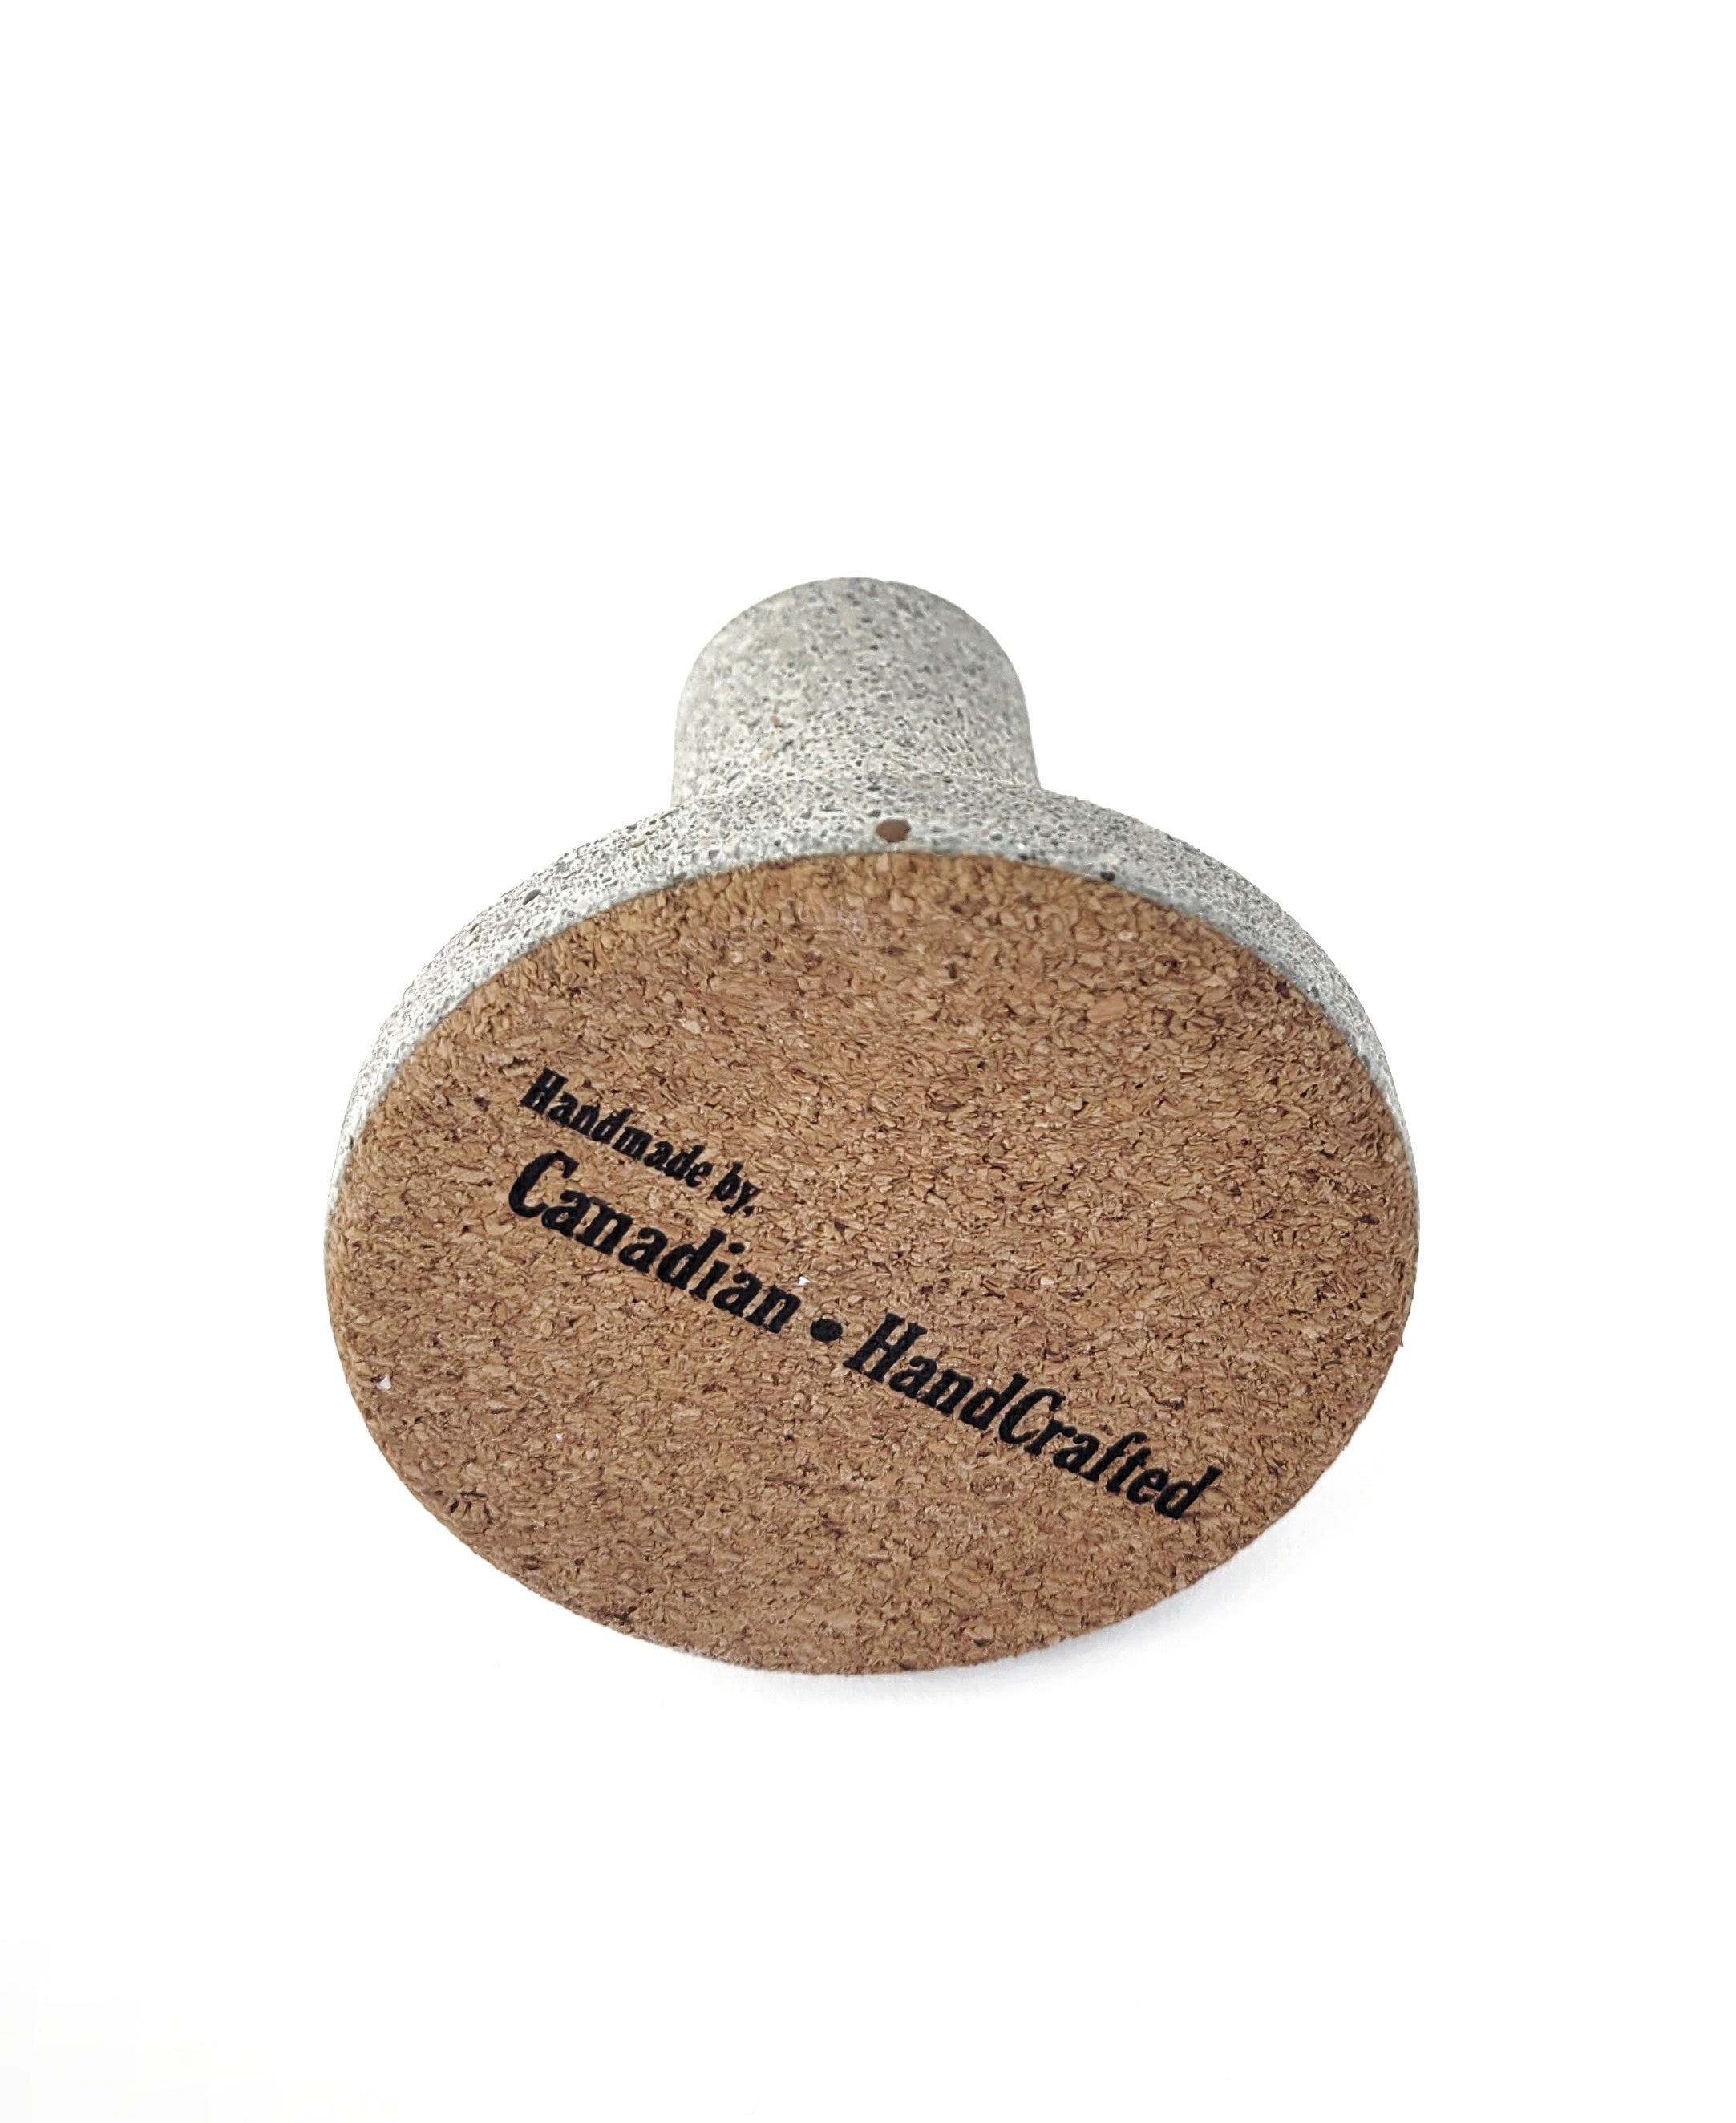 Grey Stone Taper Candle Holder on it's side with Cork bottom and 'Handmade by Canadian HandCrafted' Engraving - Detailed View on White Background